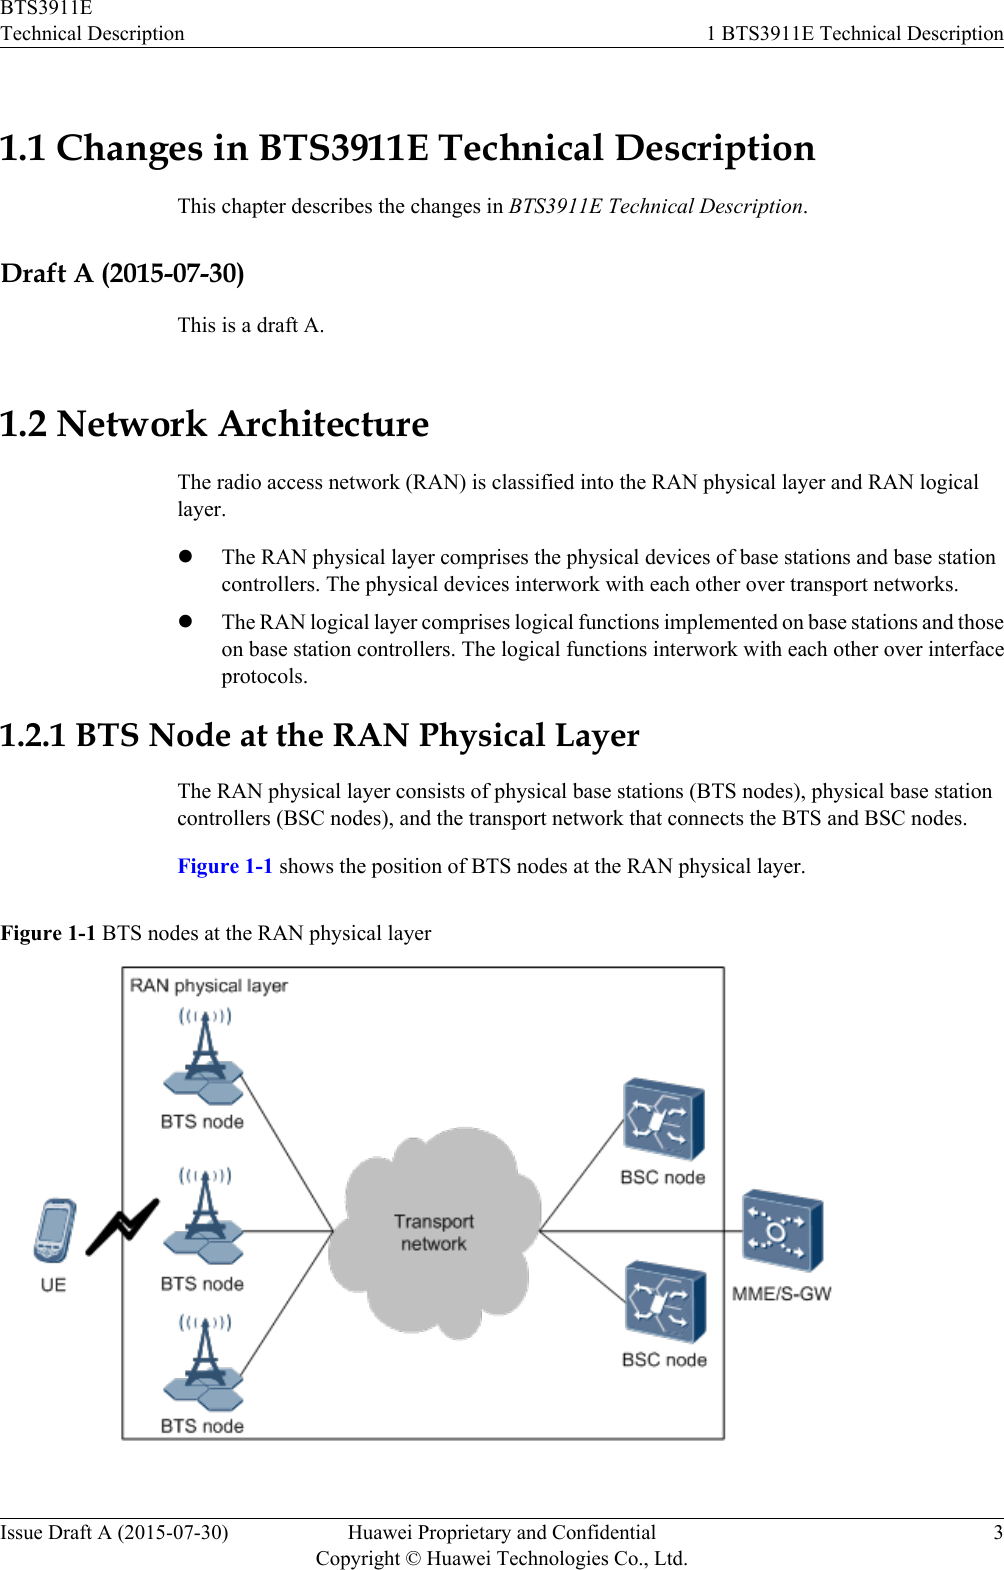 1.1 Changes in BTS3911E Technical DescriptionThis chapter describes the changes in BTS3911E Technical Description.Draft A (2015-07-30)This is a draft A.1.2 Network ArchitectureThe radio access network (RAN) is classified into the RAN physical layer and RAN logicallayer.lThe RAN physical layer comprises the physical devices of base stations and base stationcontrollers. The physical devices interwork with each other over transport networks.lThe RAN logical layer comprises logical functions implemented on base stations and thoseon base station controllers. The logical functions interwork with each other over interfaceprotocols.1.2.1 BTS Node at the RAN Physical LayerThe RAN physical layer consists of physical base stations (BTS nodes), physical base stationcontrollers (BSC nodes), and the transport network that connects the BTS and BSC nodes.Figure 1-1 shows the position of BTS nodes at the RAN physical layer.Figure 1-1 BTS nodes at the RAN physical layerBTS3911ETechnical Description 1 BTS3911E Technical DescriptionIssue Draft A (2015-07-30) Huawei Proprietary and ConfidentialCopyright © Huawei Technologies Co., Ltd.3